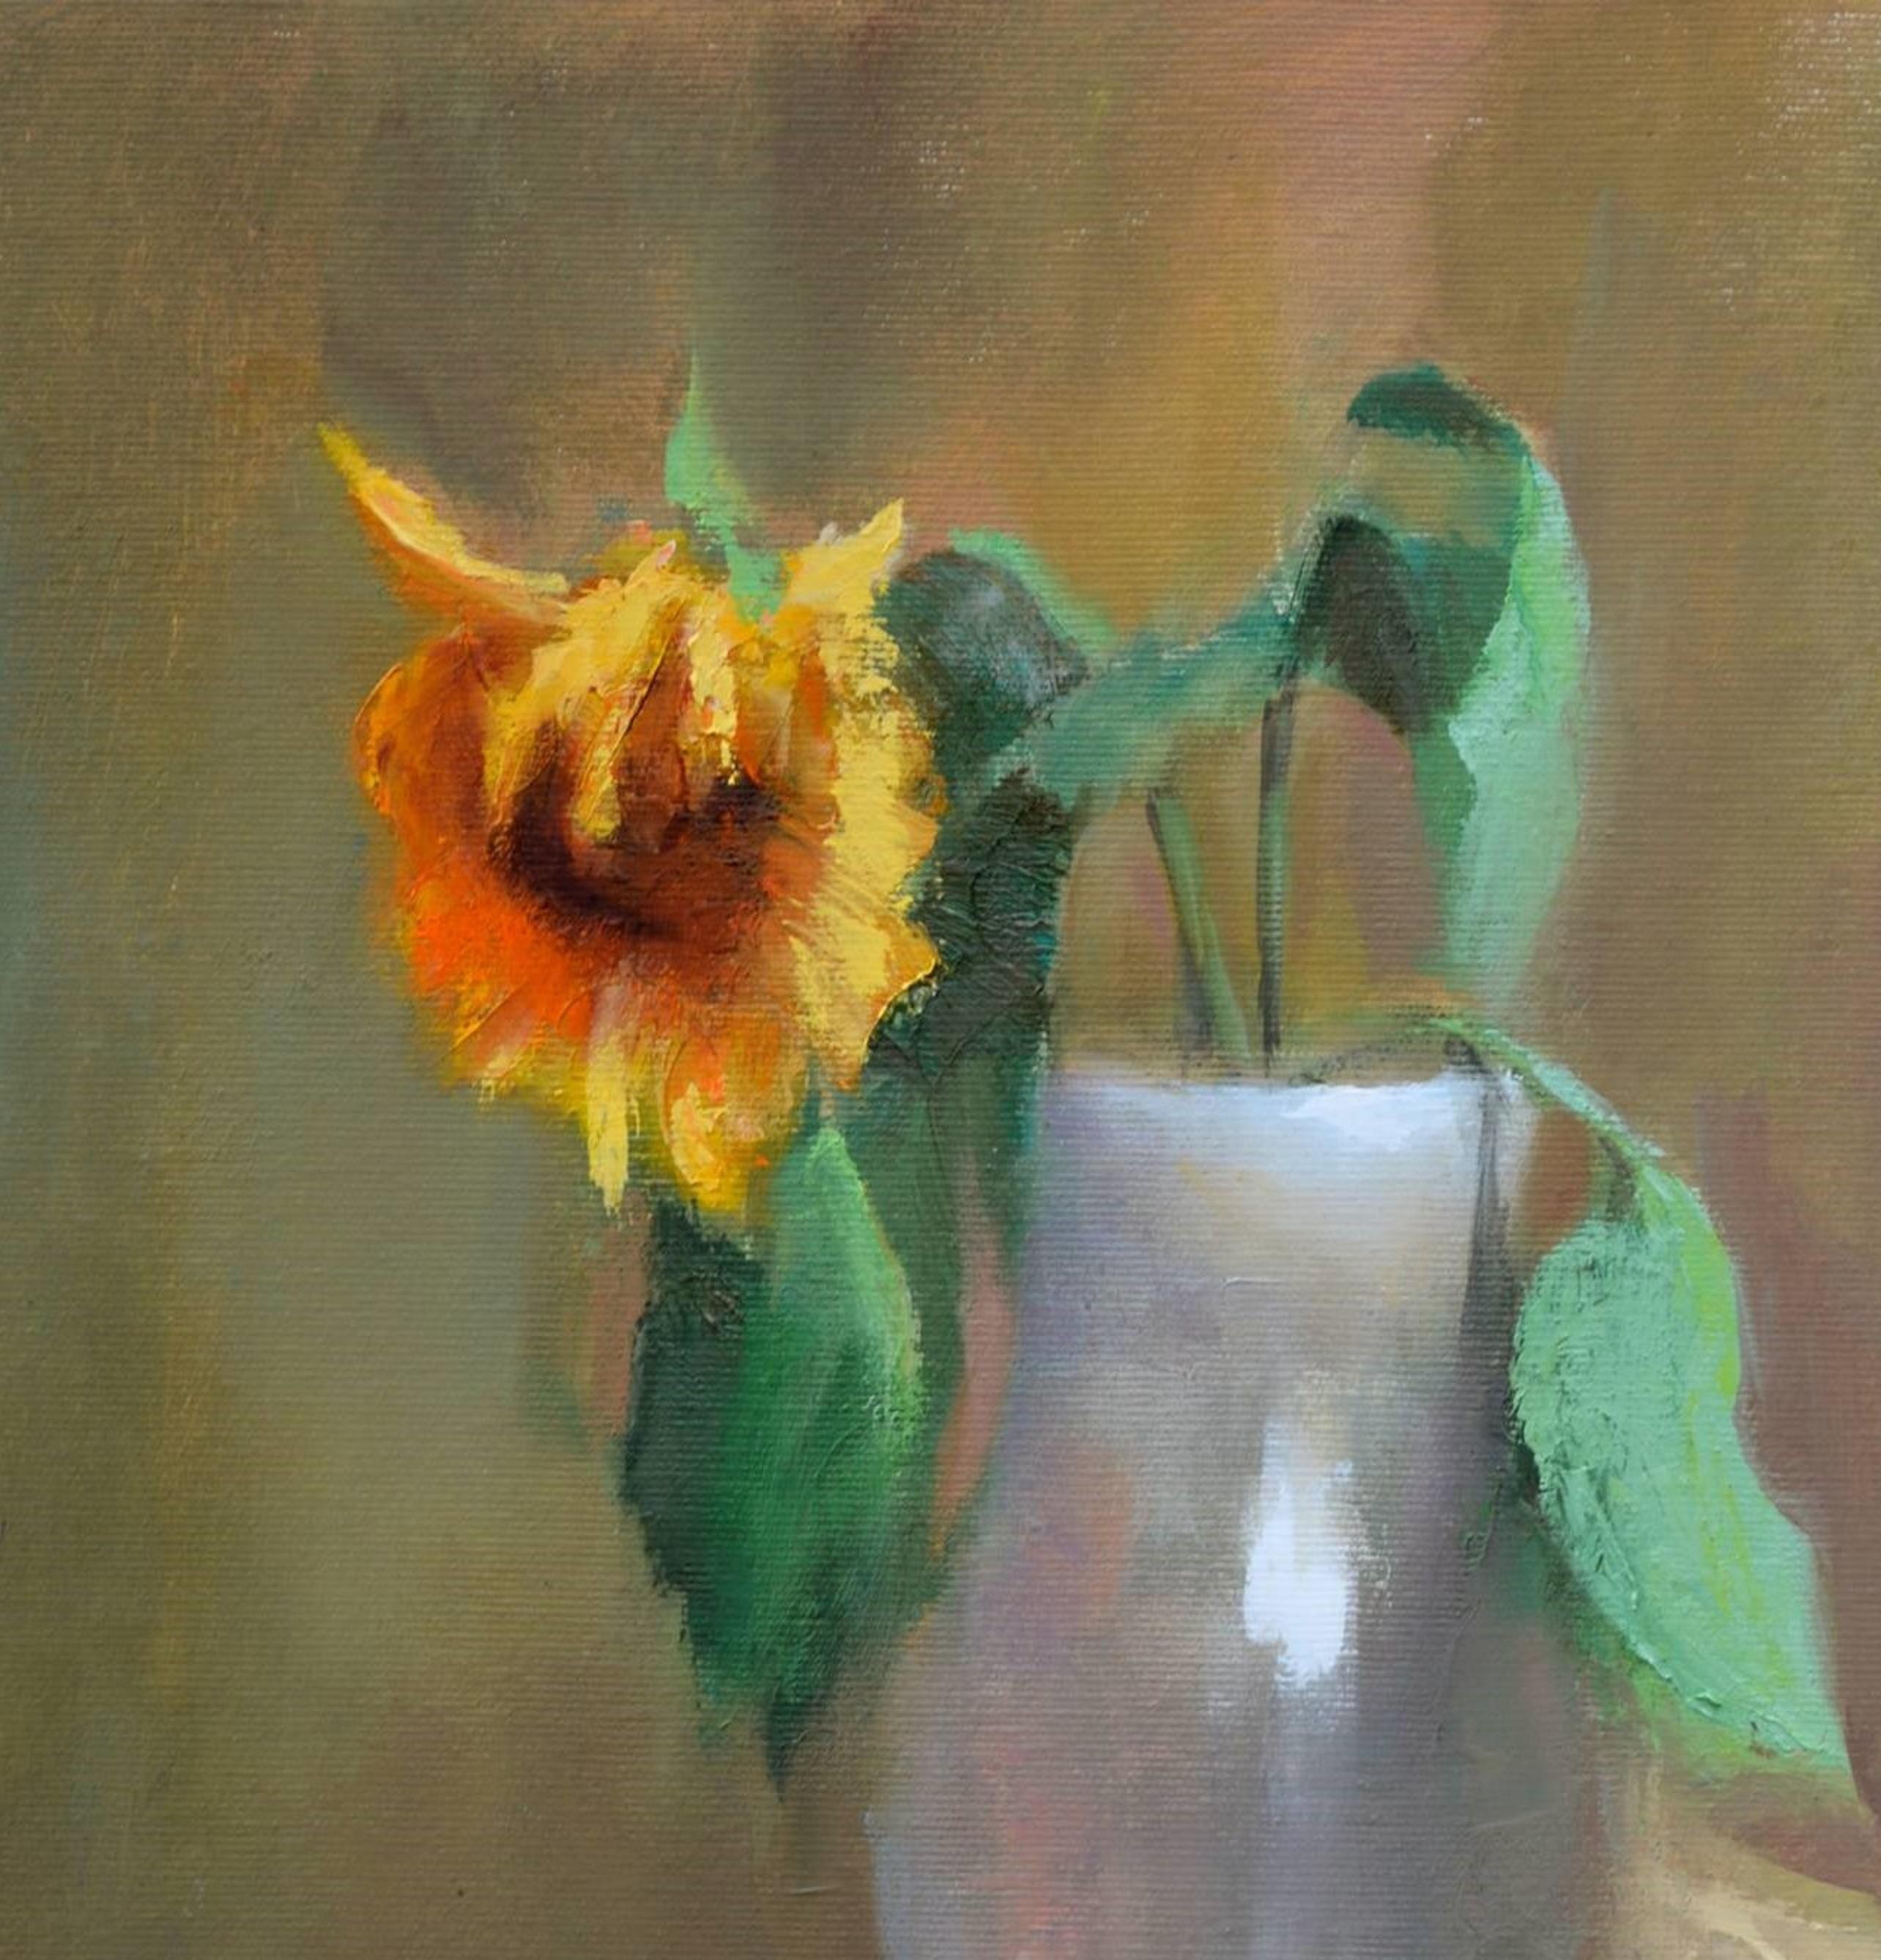 In this piece, I've explored the juxtaposition of life's ephemerality and enduring warmth. The sunflower, despite its wilting state, is a vibrant focal point that offers a moment of reflection and a spark of joy. Rendered in oil with expressive,